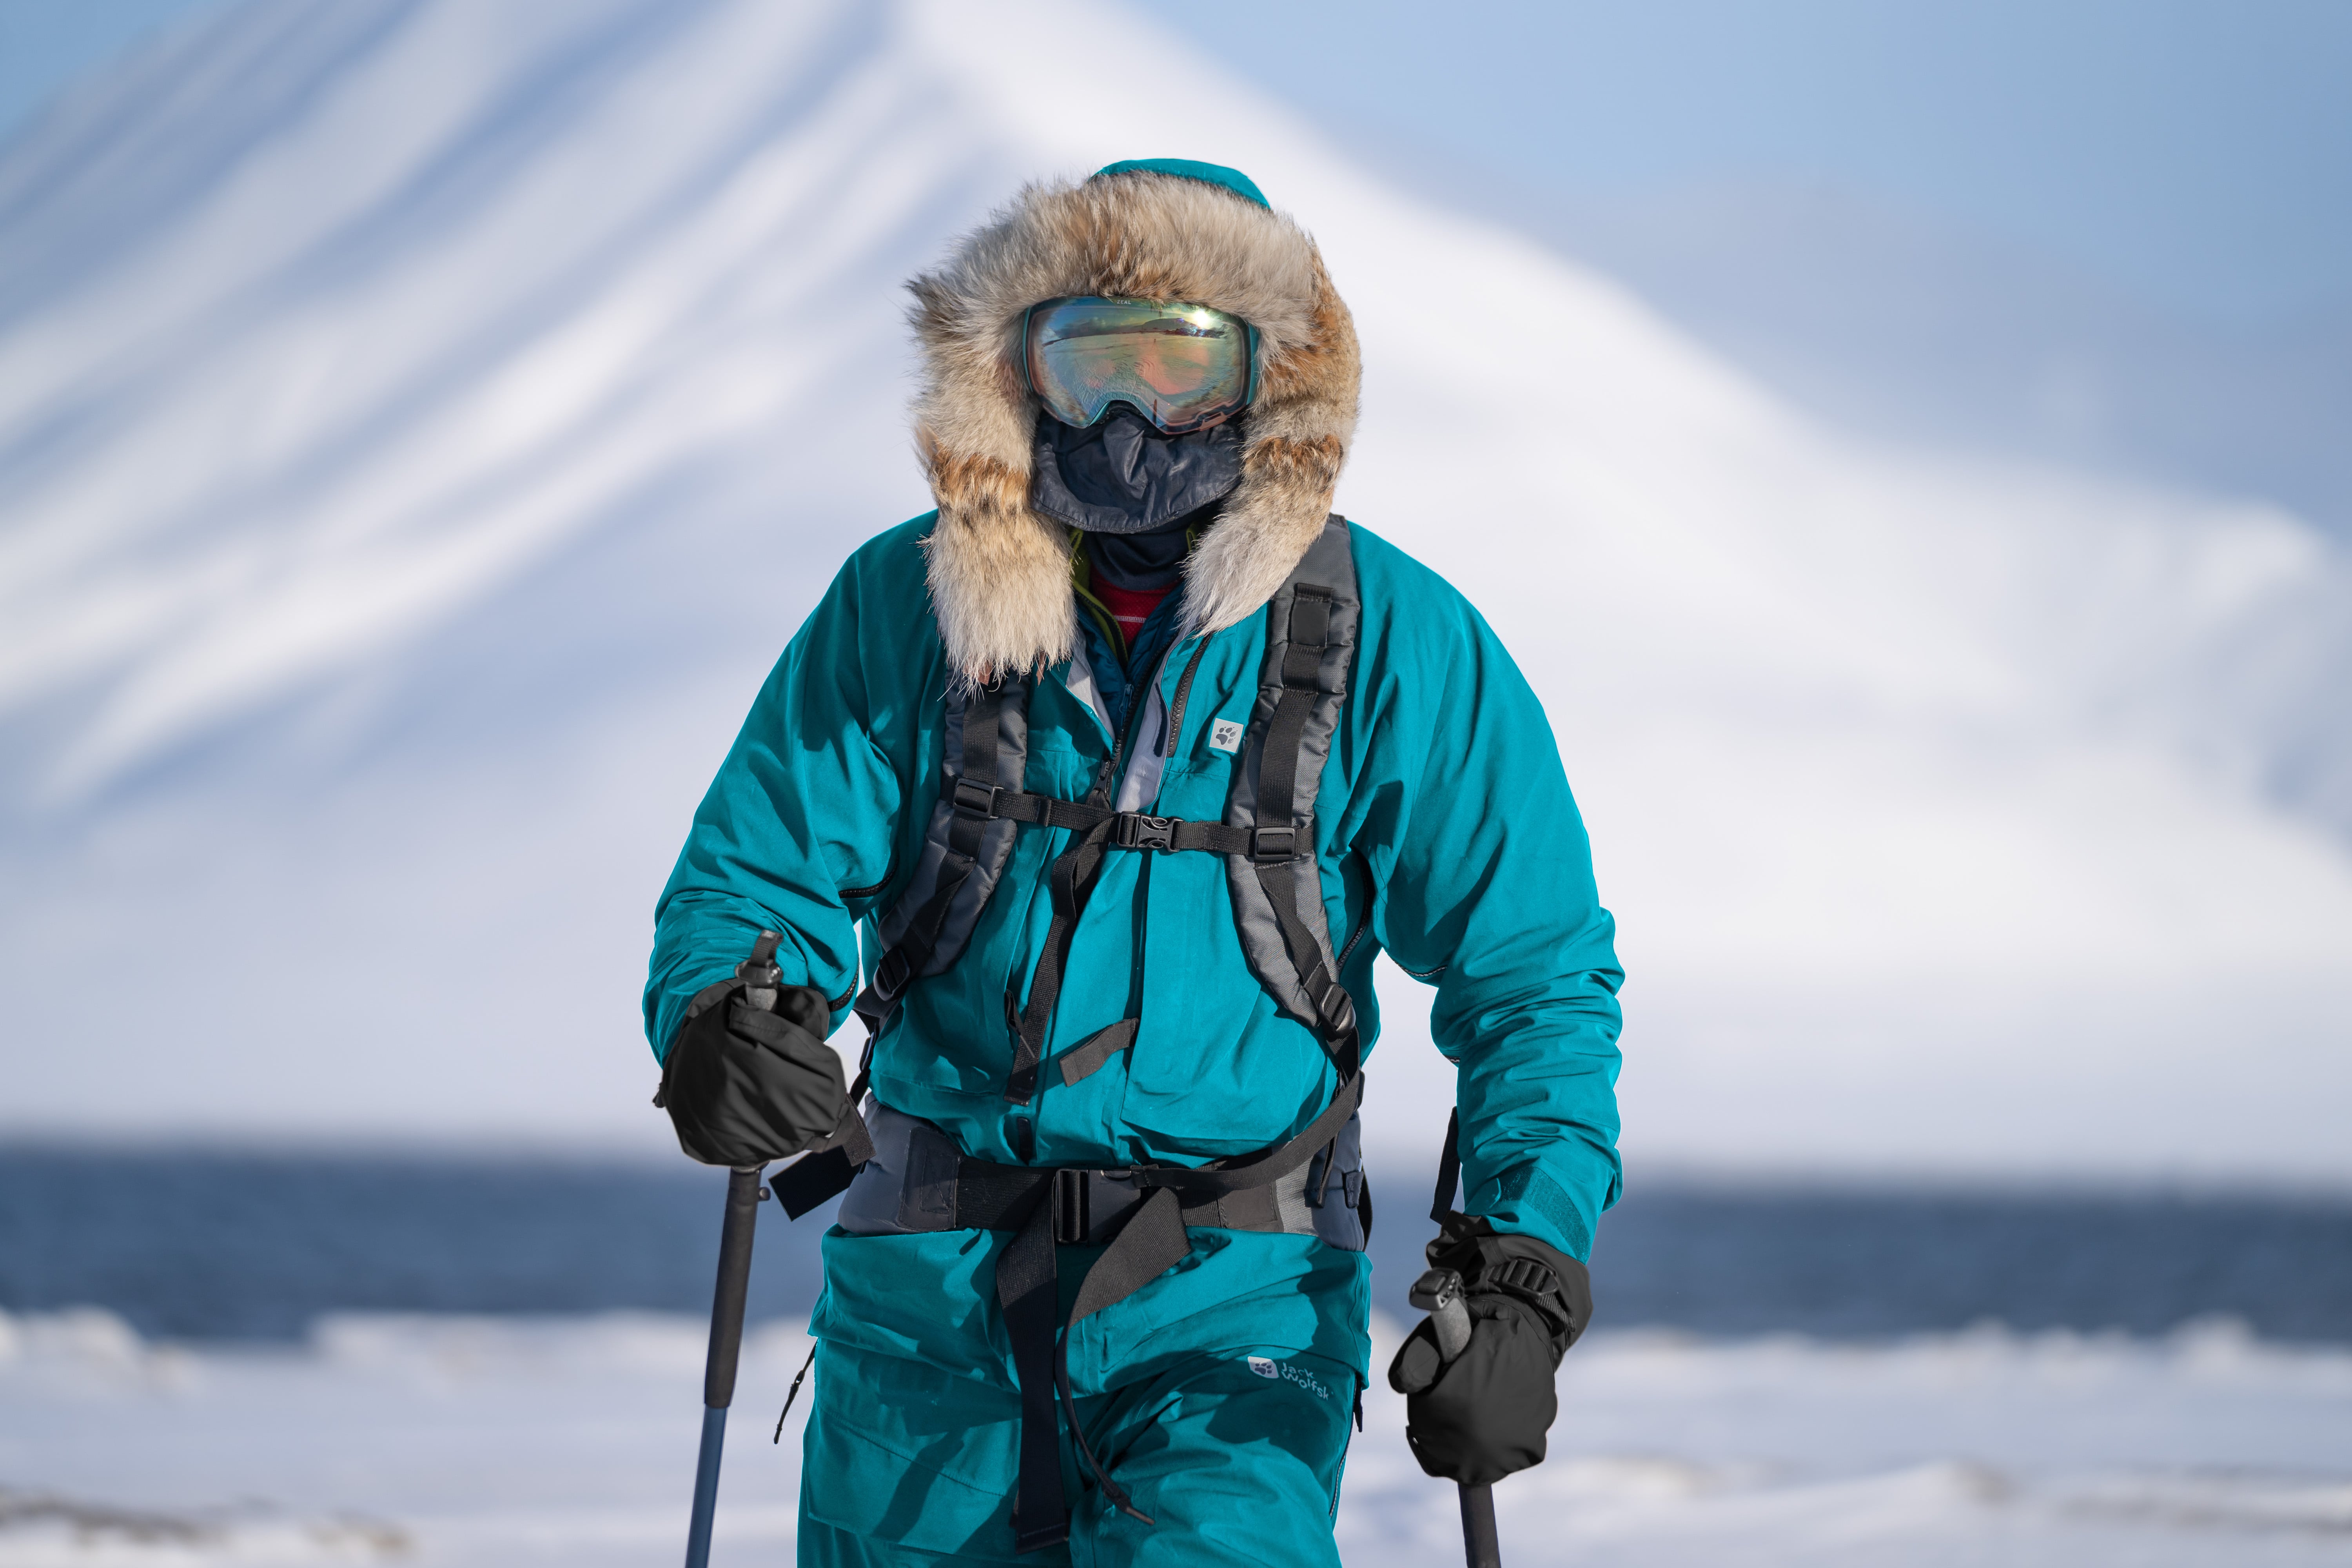 Review: The EXPDN 3L Jkt & Pant from Jack Wolfskin have won the ISPO Award  2023